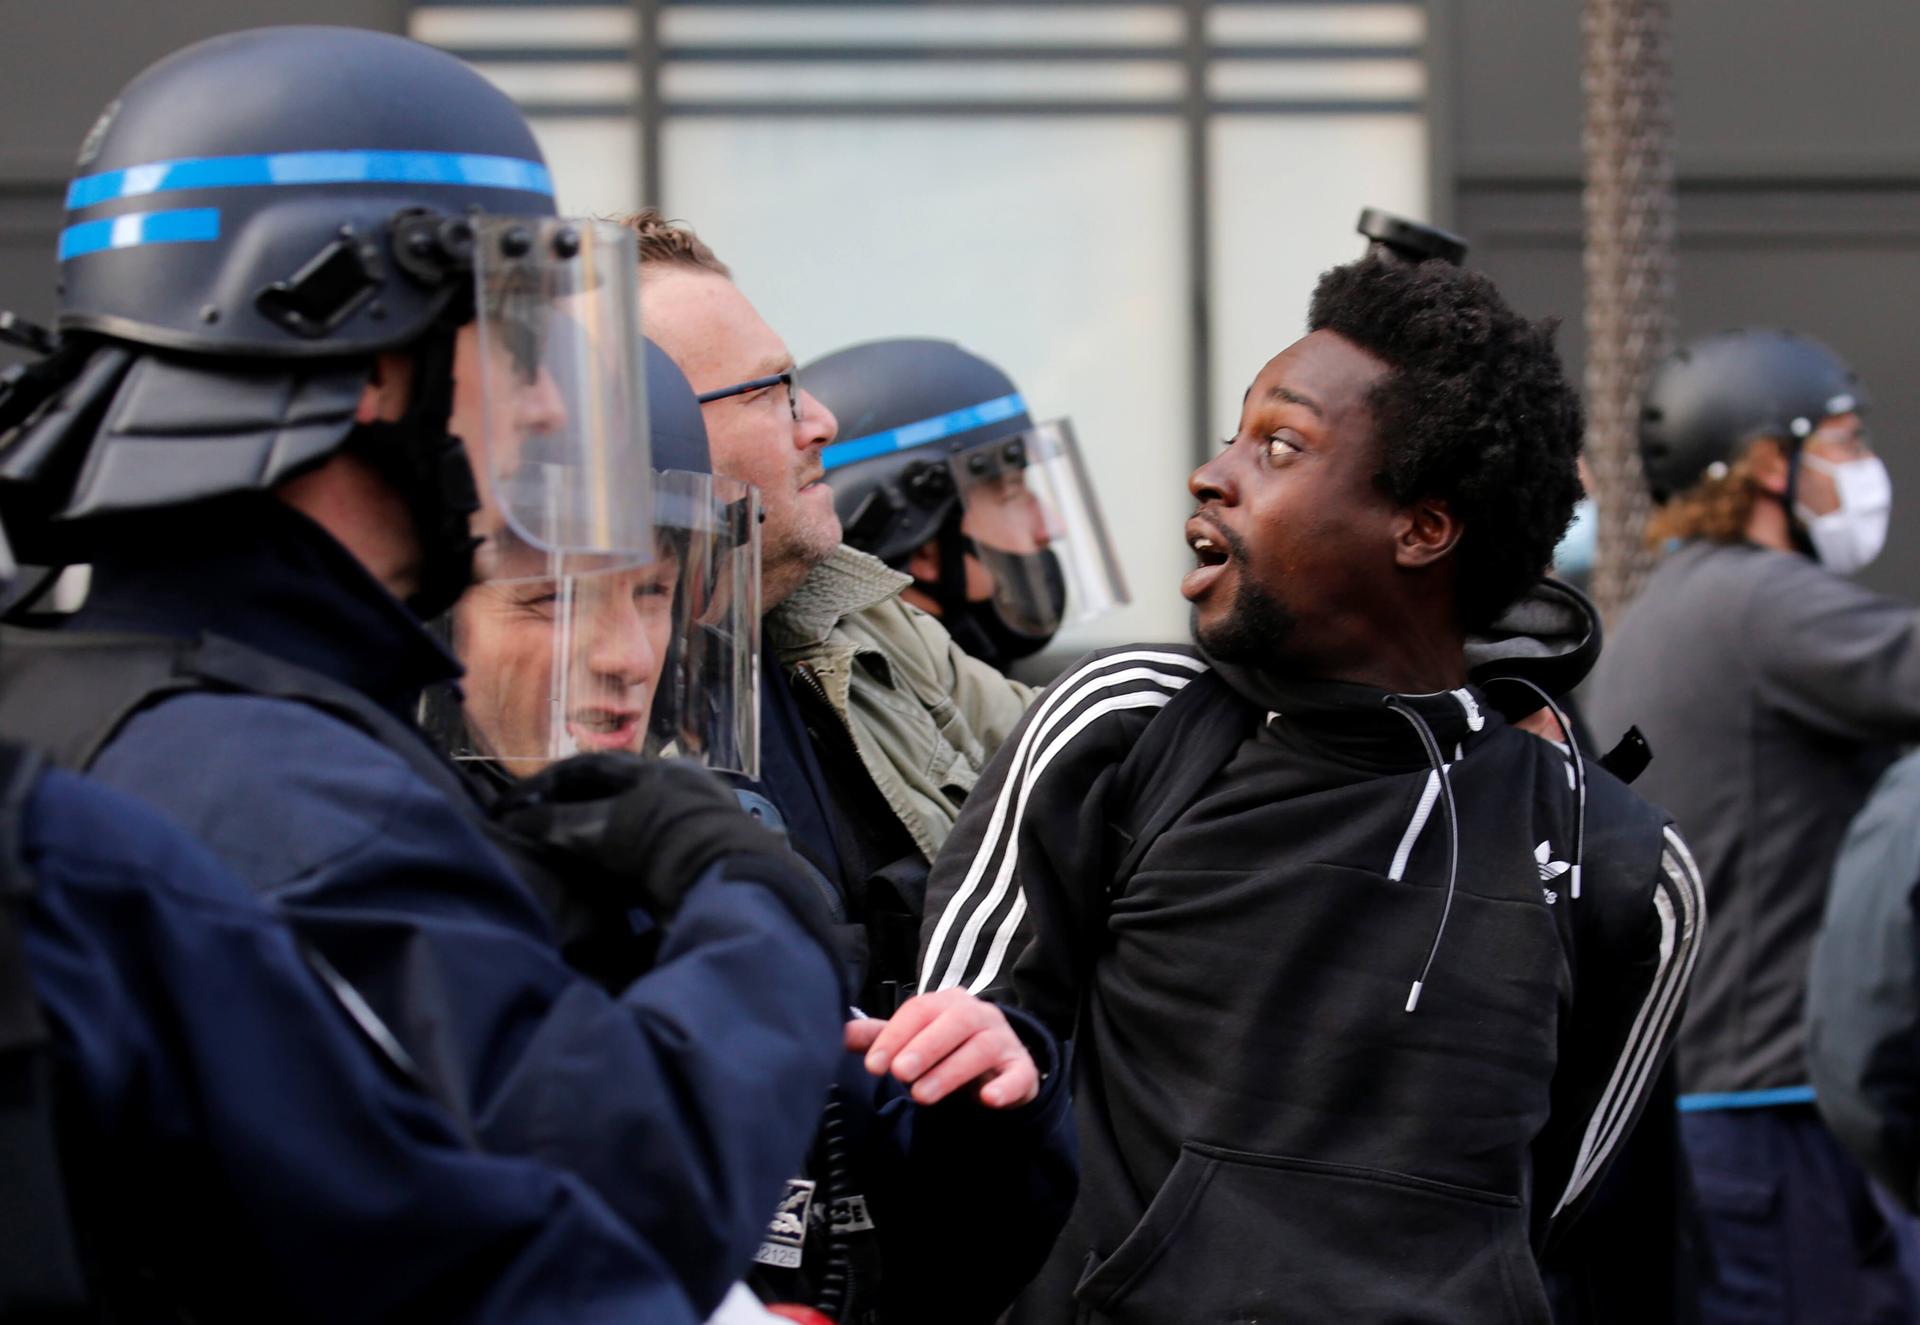 A black Frenchman wearing sweatshirt is detained by a uniformed police offer in France